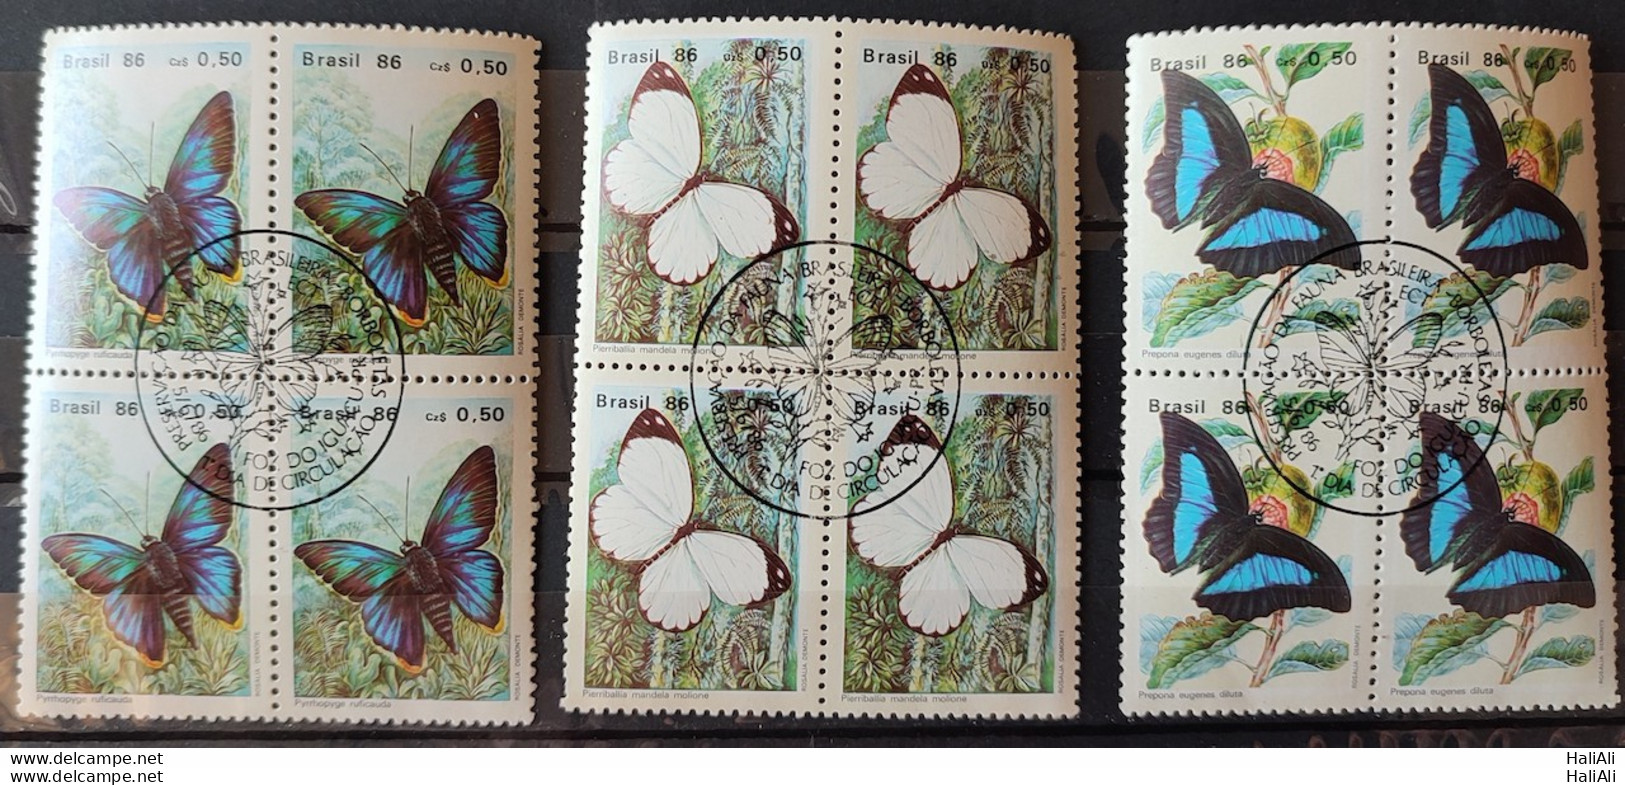 C 1512 Brazil Stamp Butterfly Insects 1986 Block Of 4 CBC PR Complete Series 2.jpg - Unused Stamps